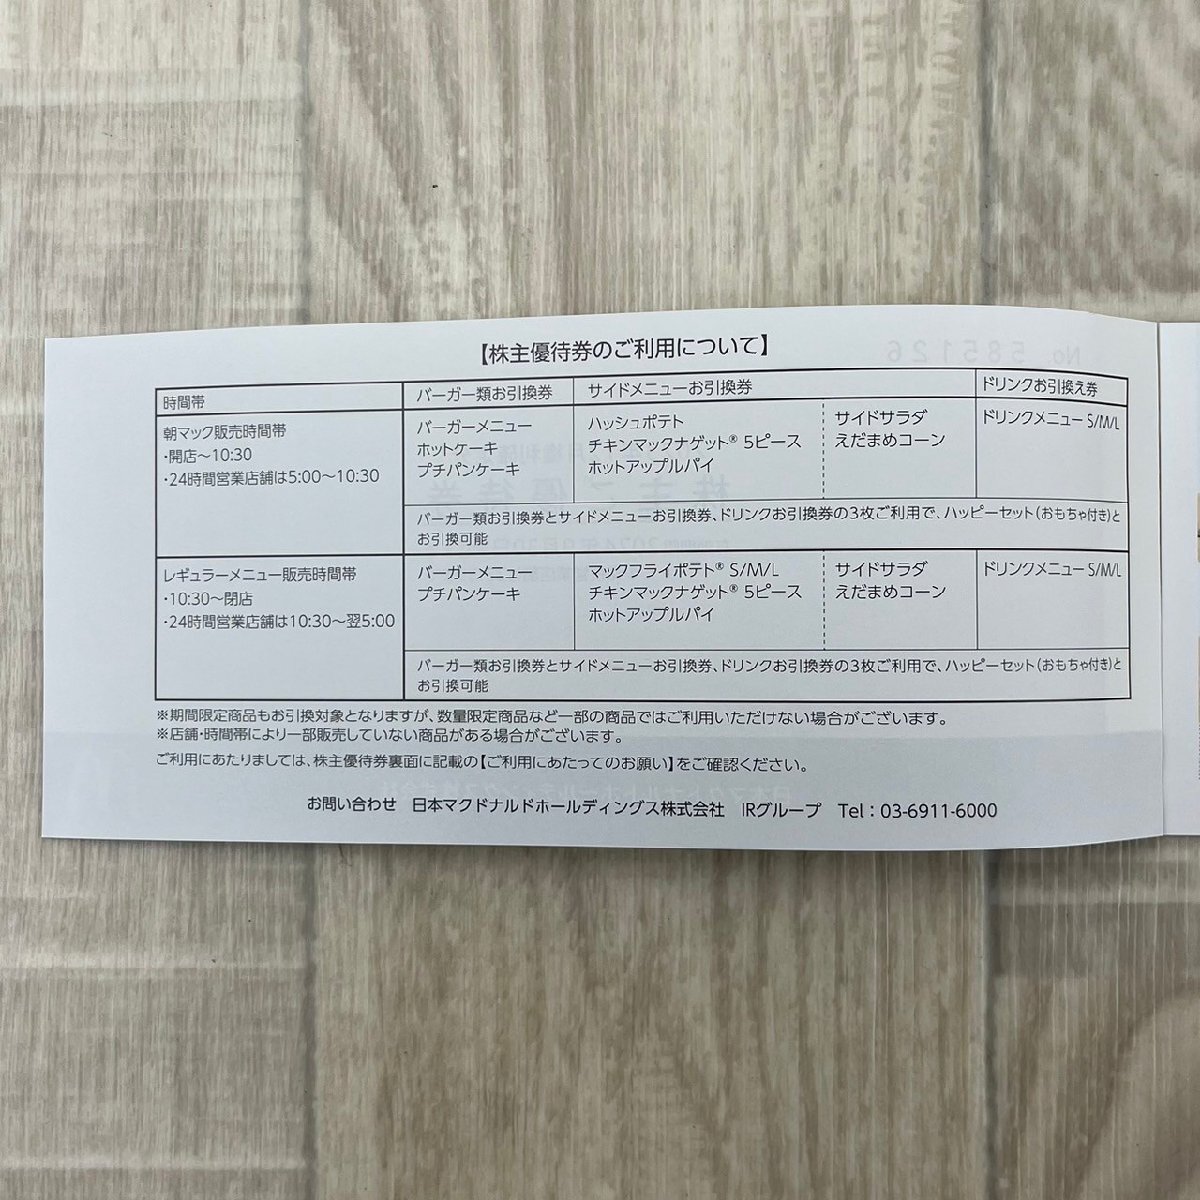  unused McDonald's stockholder . complimentary ticket have efficacy time limit 2024.9.30 till 6 sheets ×5 pcs. postage 140 jpy value set Mac stockholder complimentary ticket coupon handle burger ①